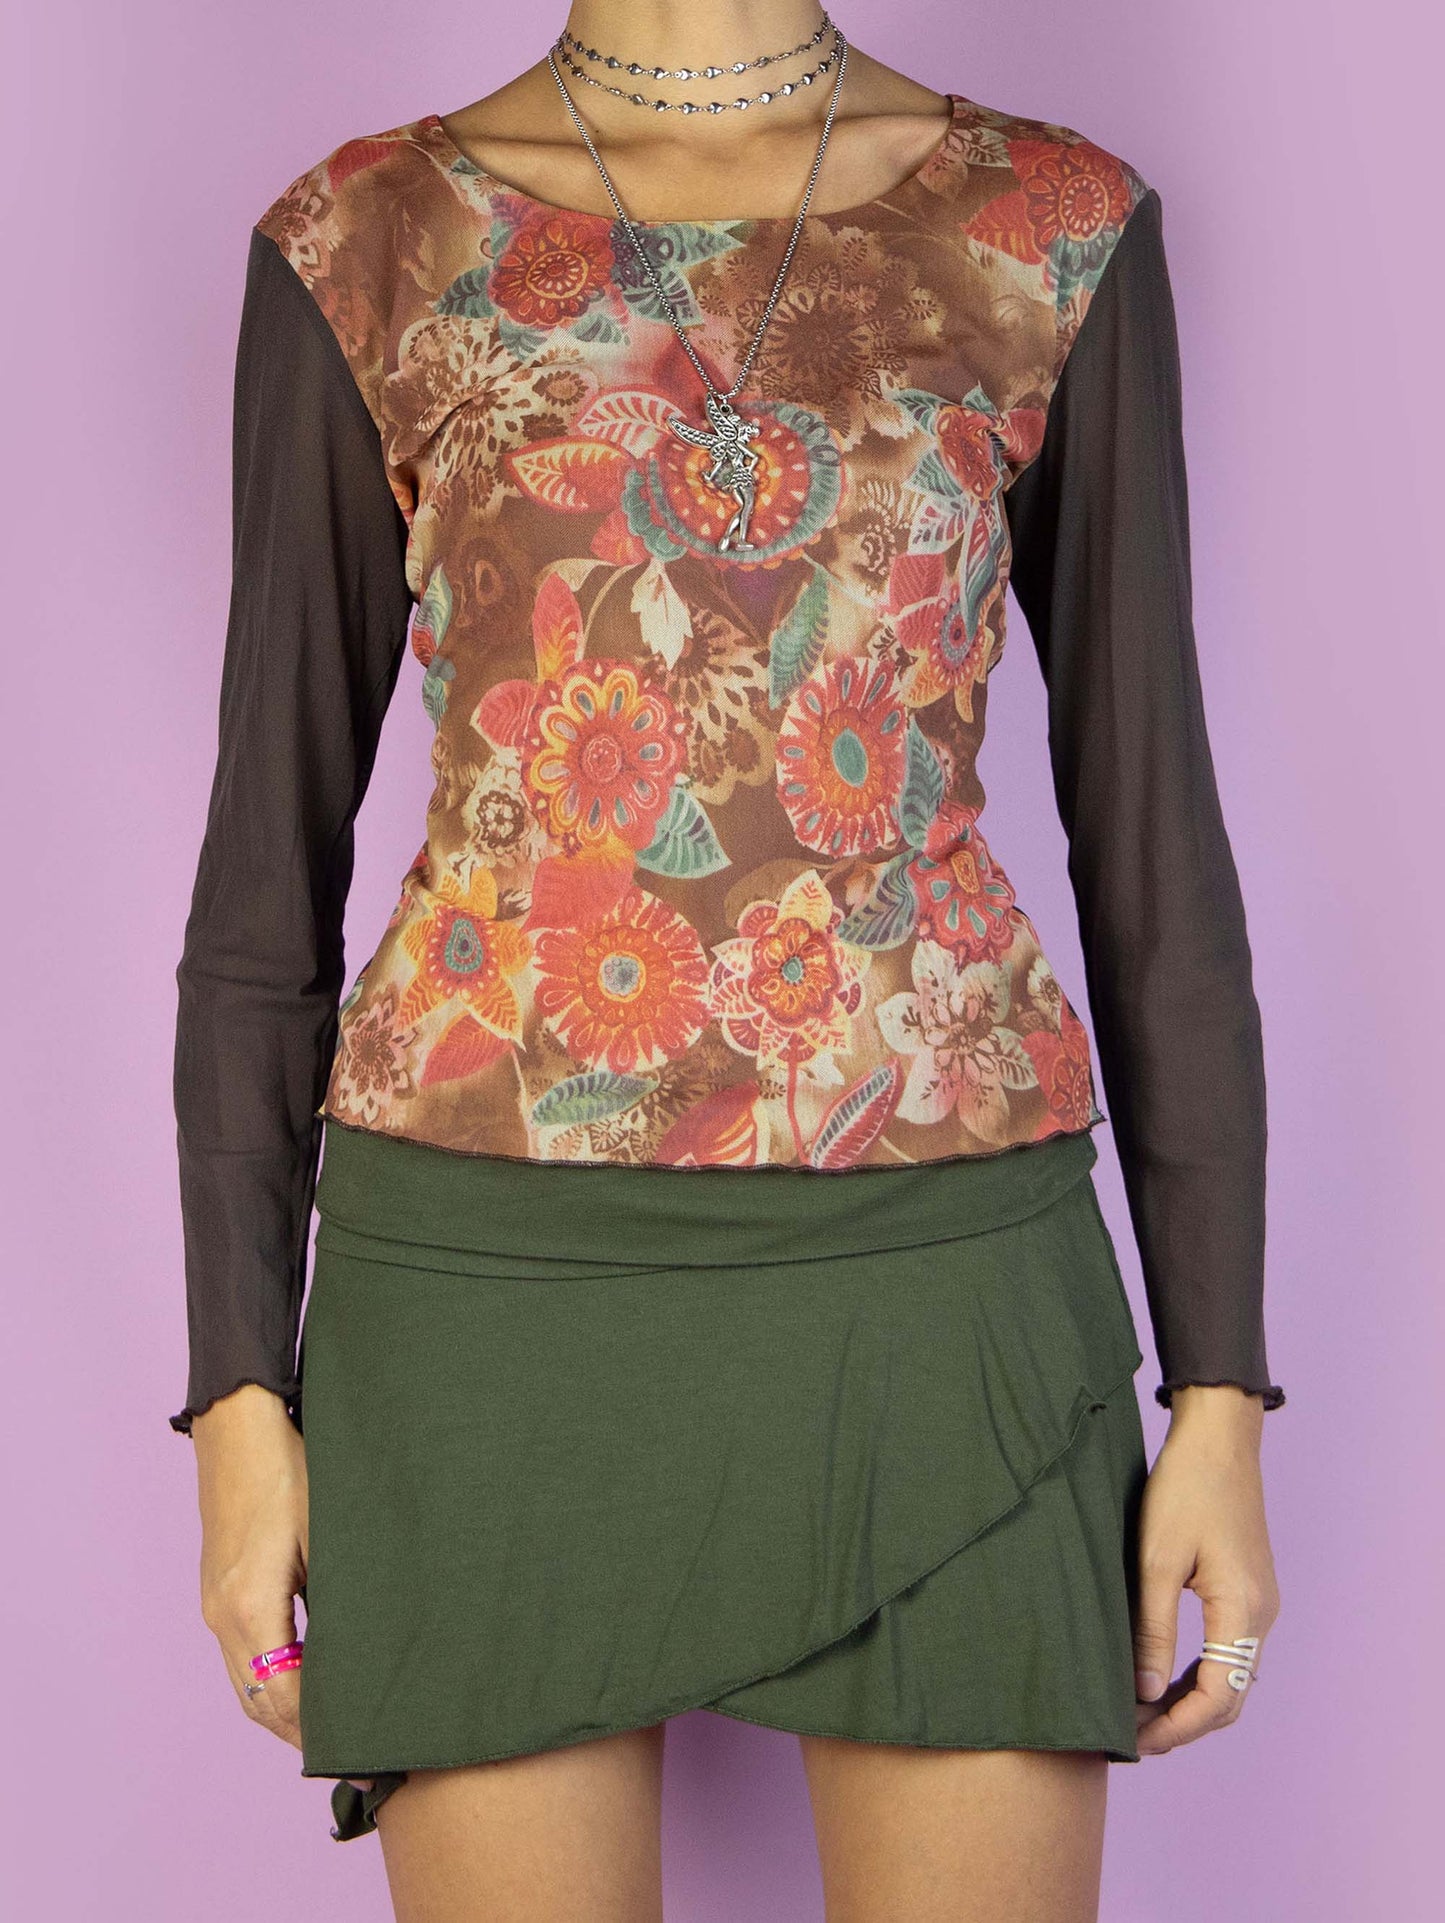 The Y2K Brown Mesh Graphic Top is a vintage long-sleeved semi-sheer mesh shirt with a multicolored abstract floral print on the front. Super cute fairy grunge 2000s subversive top.